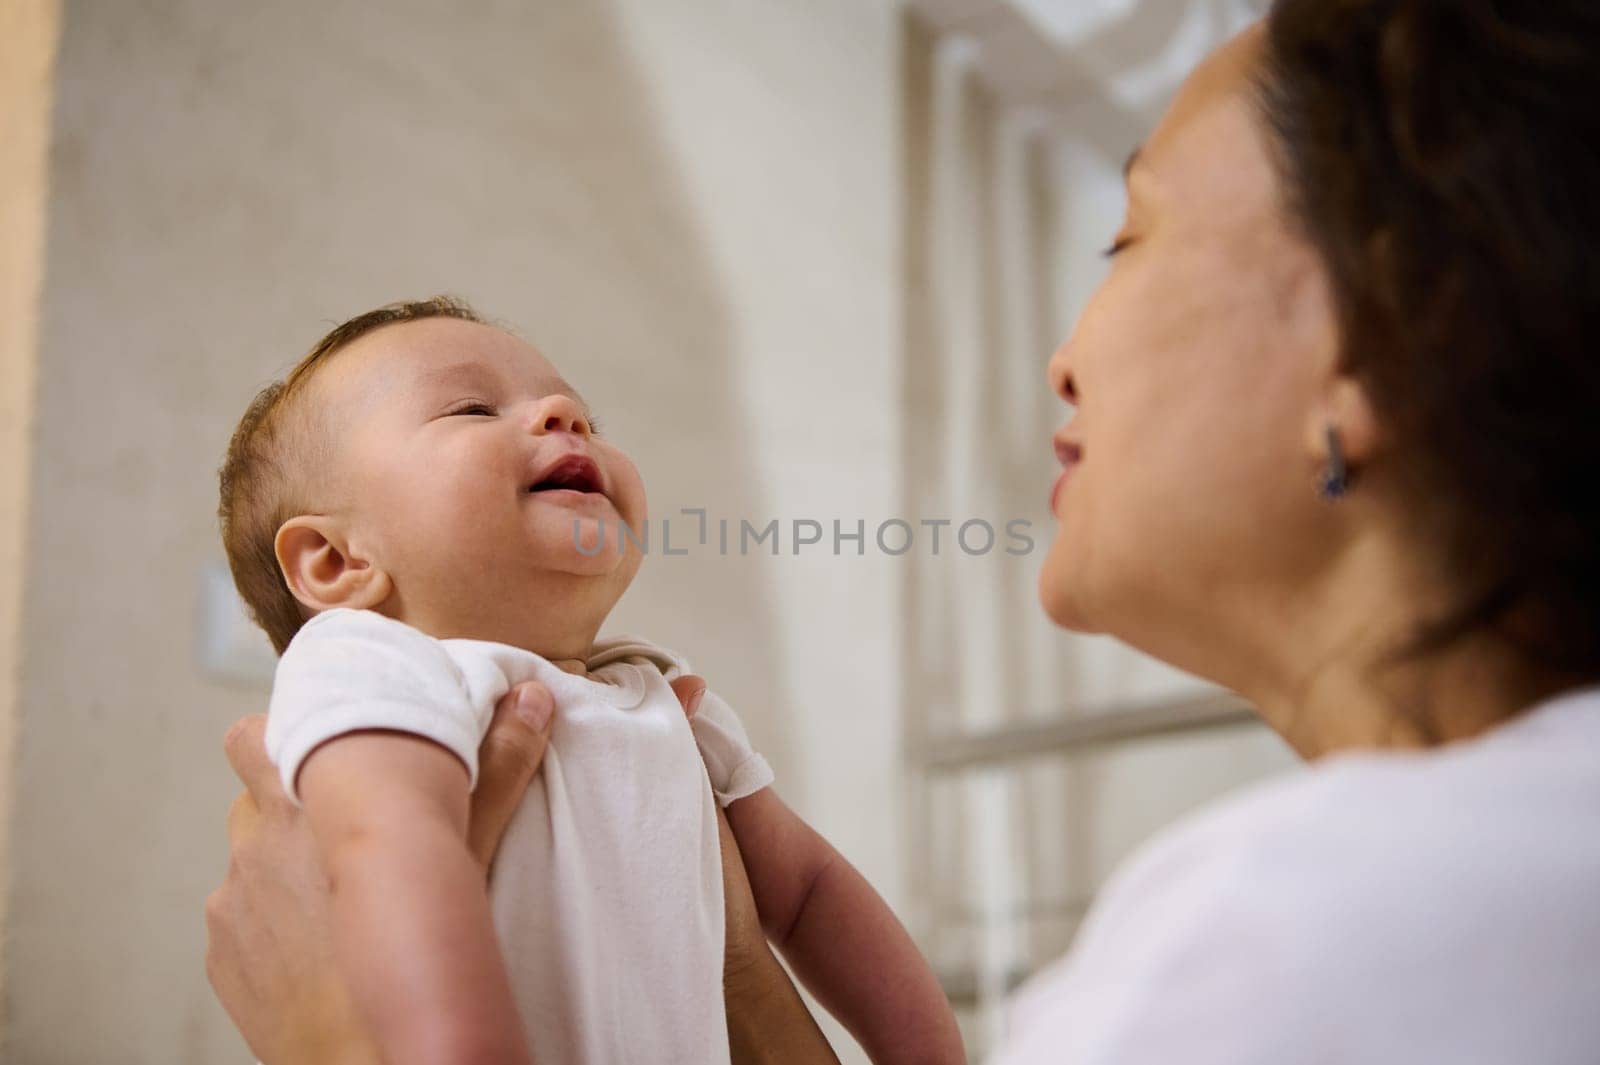 Close-up authentic portrait of a lovely newborn baby boy expressing positive emotions, smiling and laughing in tender embrace of his loving affectionate mother. Happy babyhood, infancy and childhood